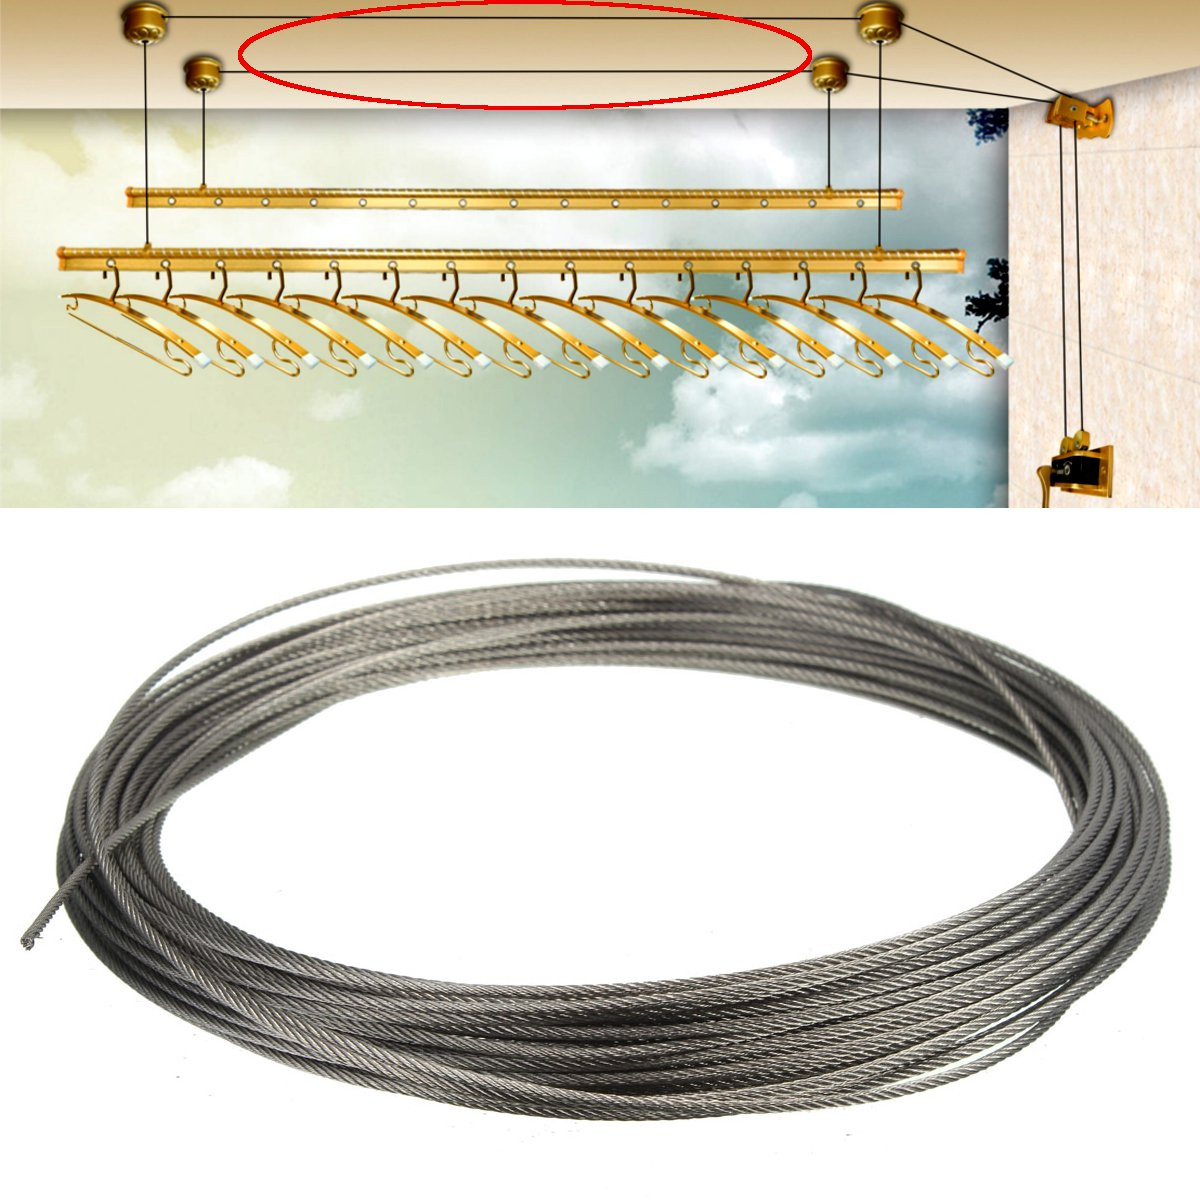 15M-316-Stainless-Steel-Clothes-Cable-Line-Wire-Rope-1035887